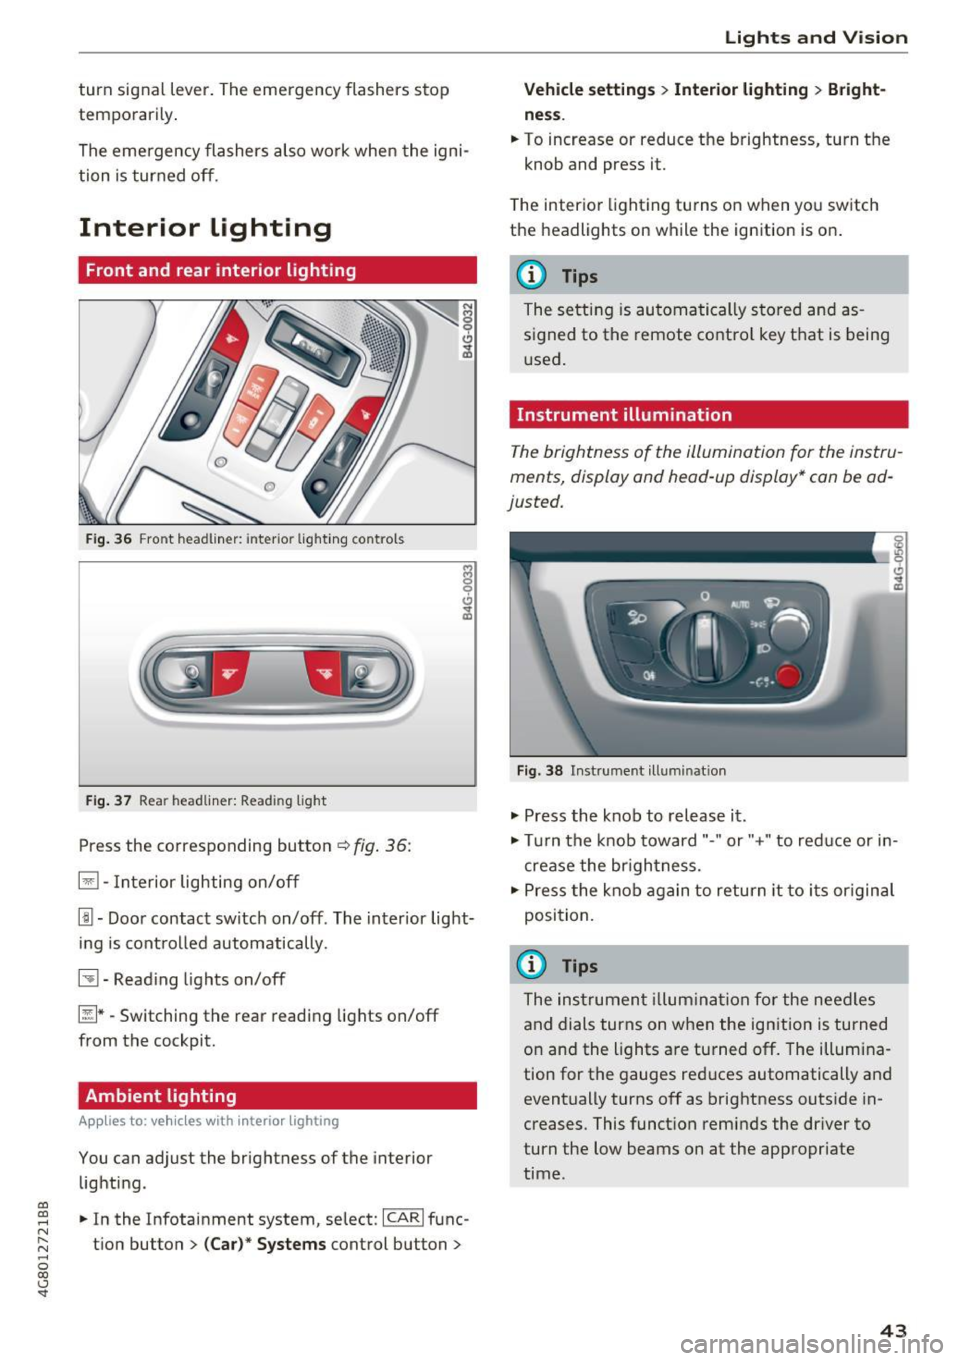 AUDI A7 2017  Owner´s Manual co 
co 
.... N 
" N .... 0 co <.,;) SI 
turn  signal  lever. The emergency  flashers  stop 
temporarily . 
The emergency  flashers  also  wo rk when  the  igni ­
tion  is  turned  off . 
Interior  